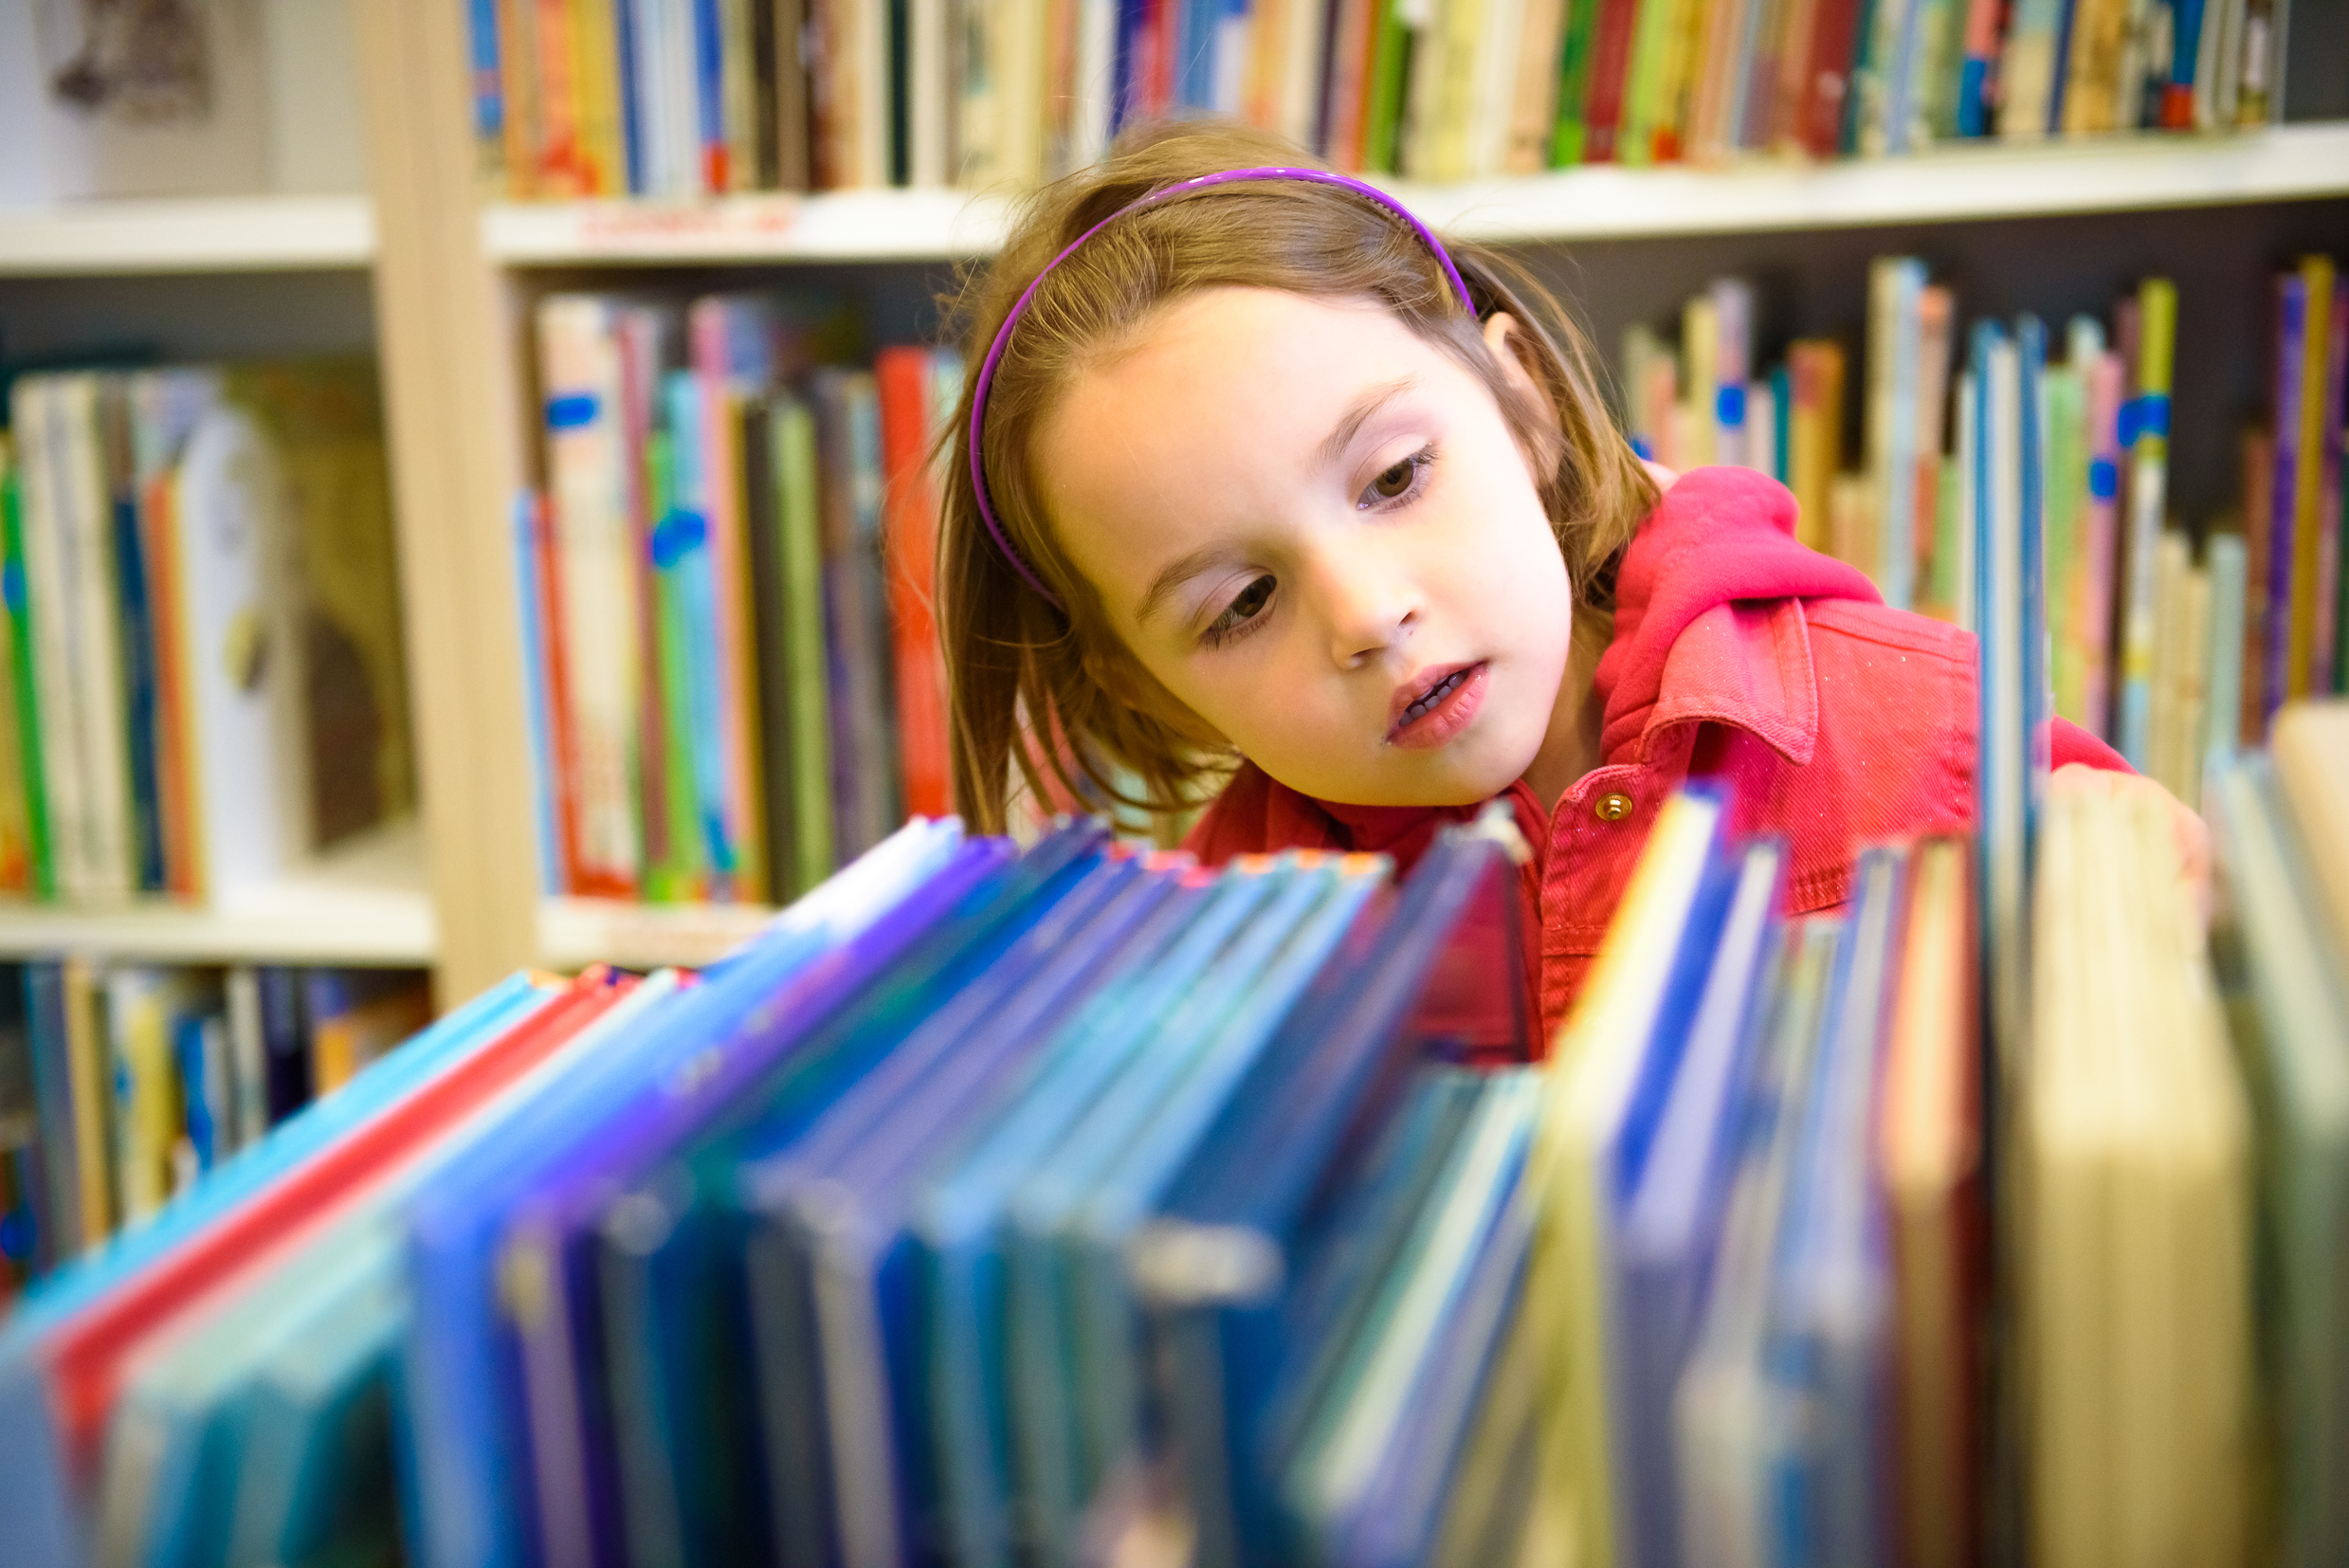 A little girl in a library | Source: Shutterstock